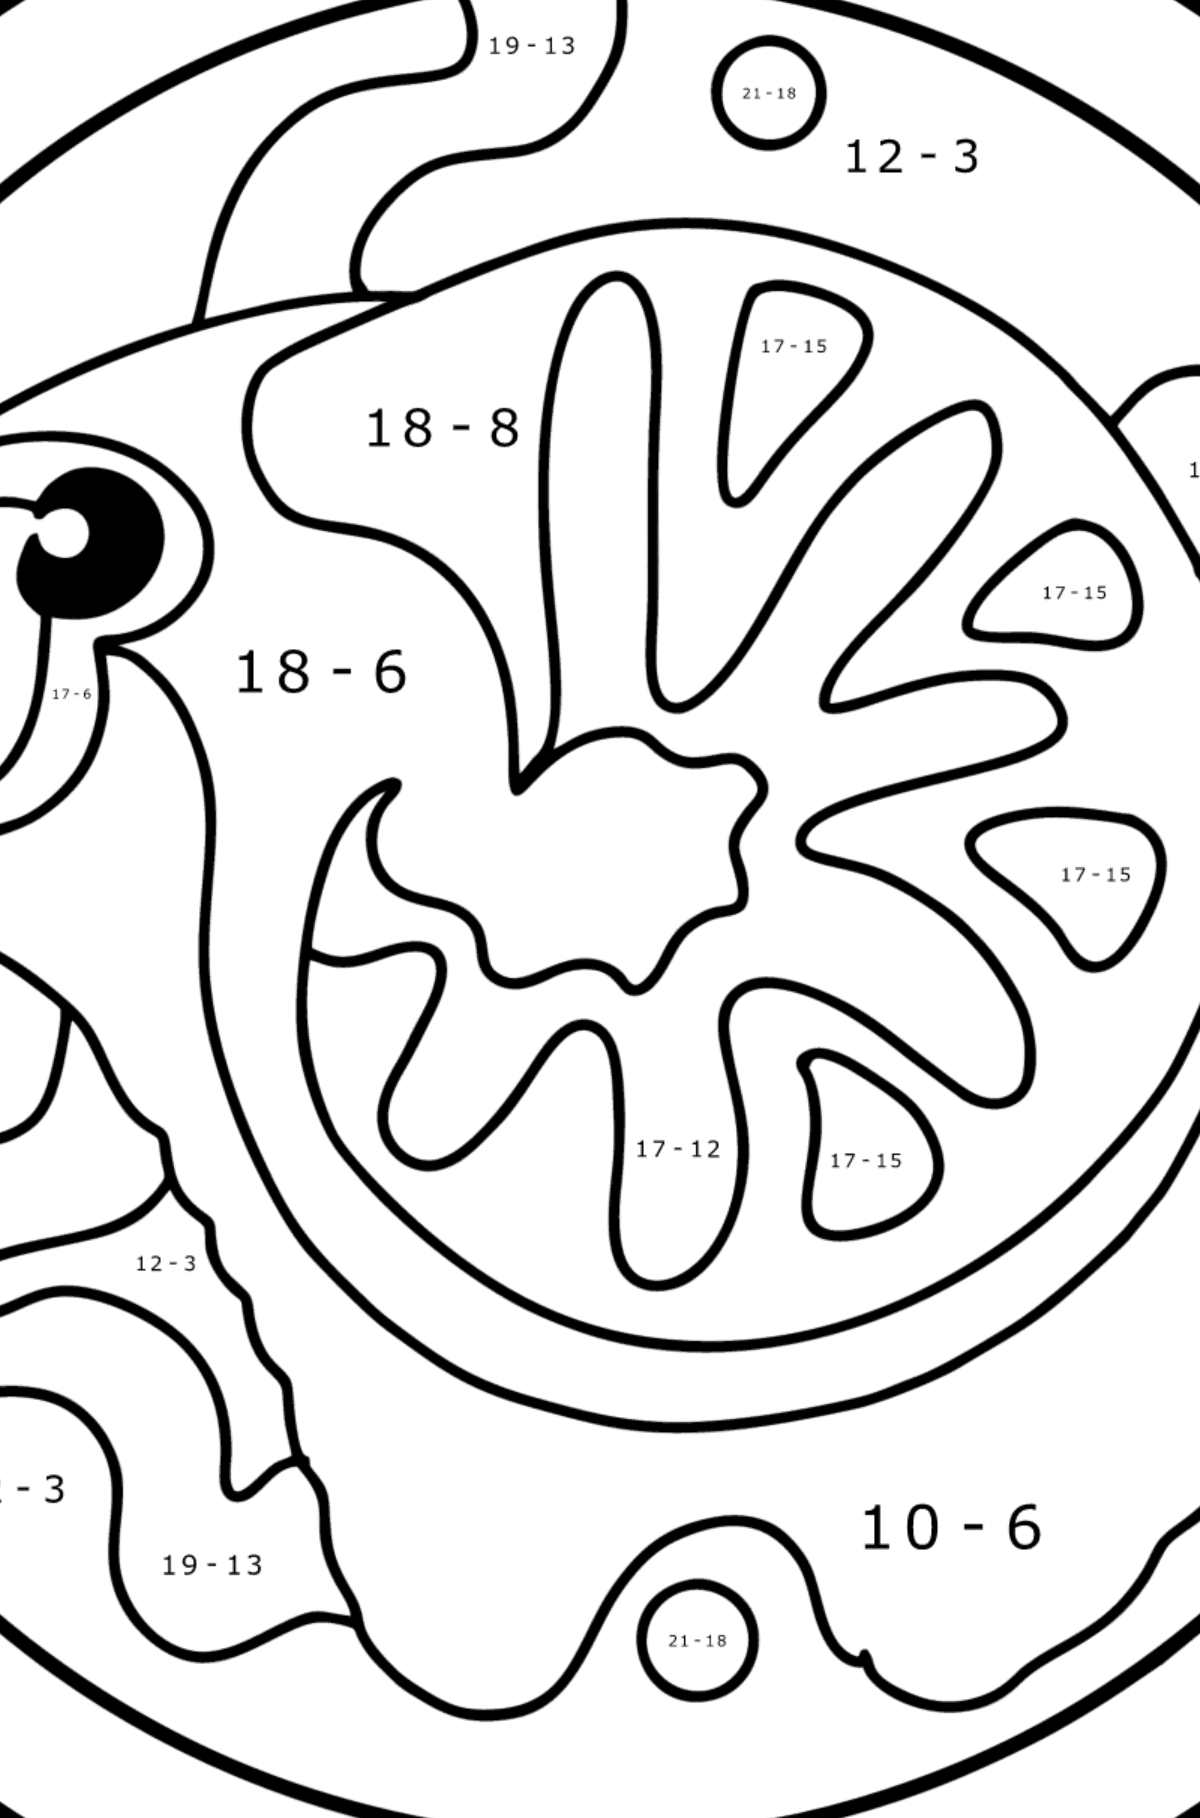 Coloring page for kids - zodiac sign Aries - Math Coloring - Subtraction for Kids